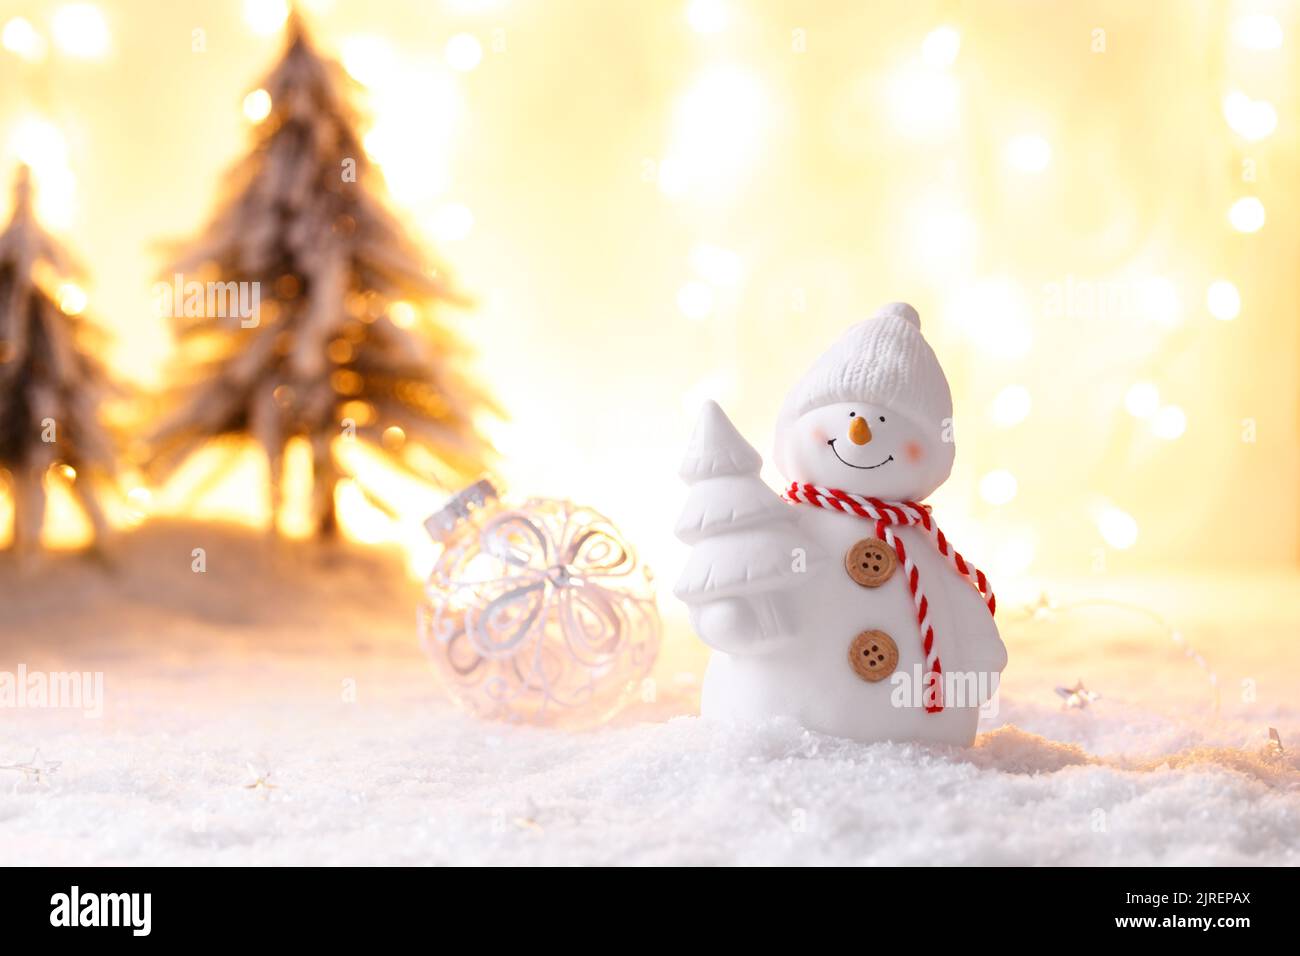 Snowman toy on the snow Christmas or New Year festive greeting card template Stock Photo